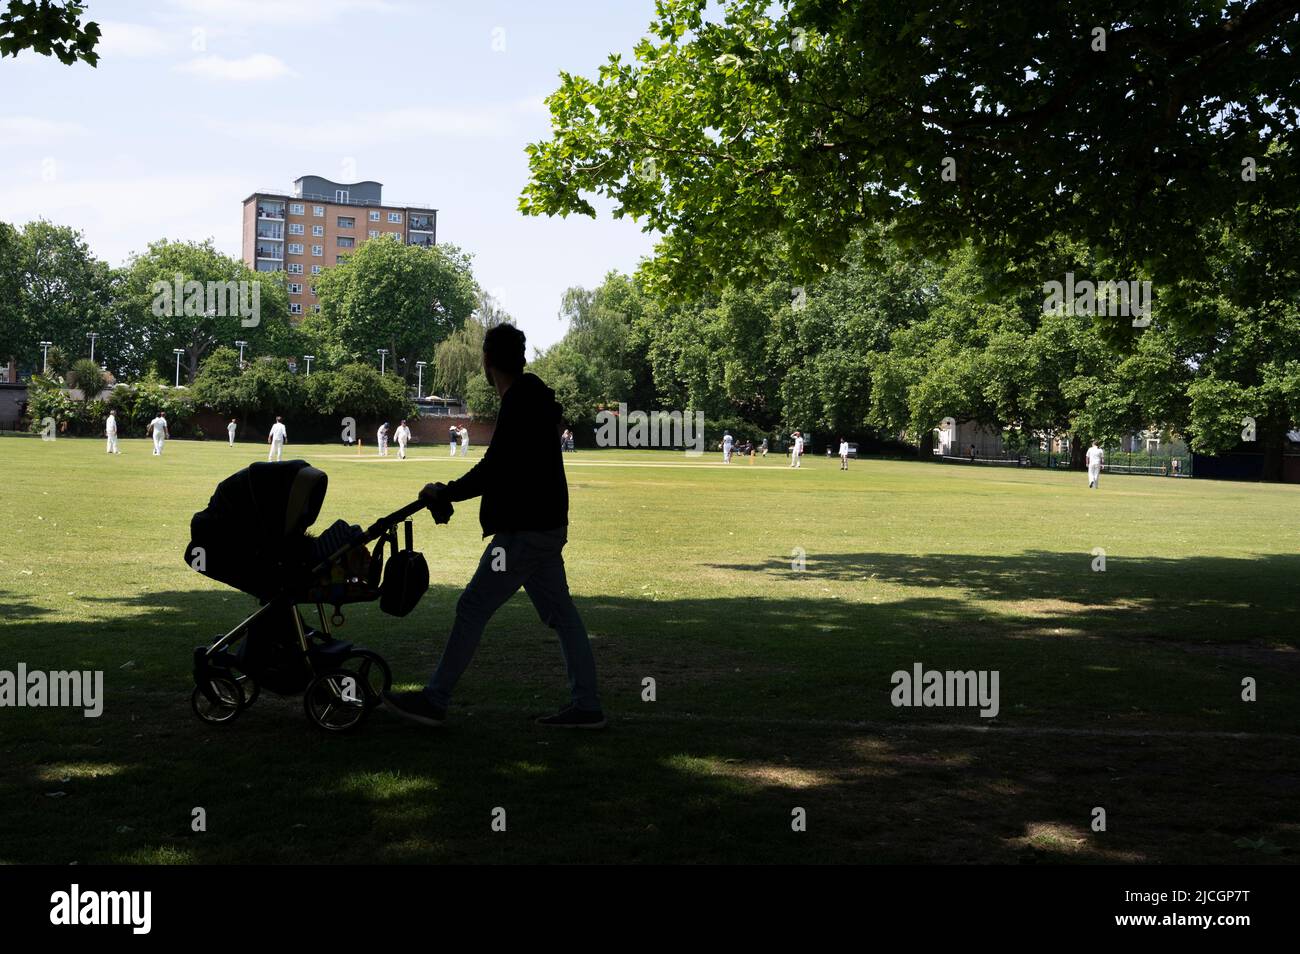 London, Hackney. London Fields. Cricket game underway with man pushing a baby in a pram. Stock Photo